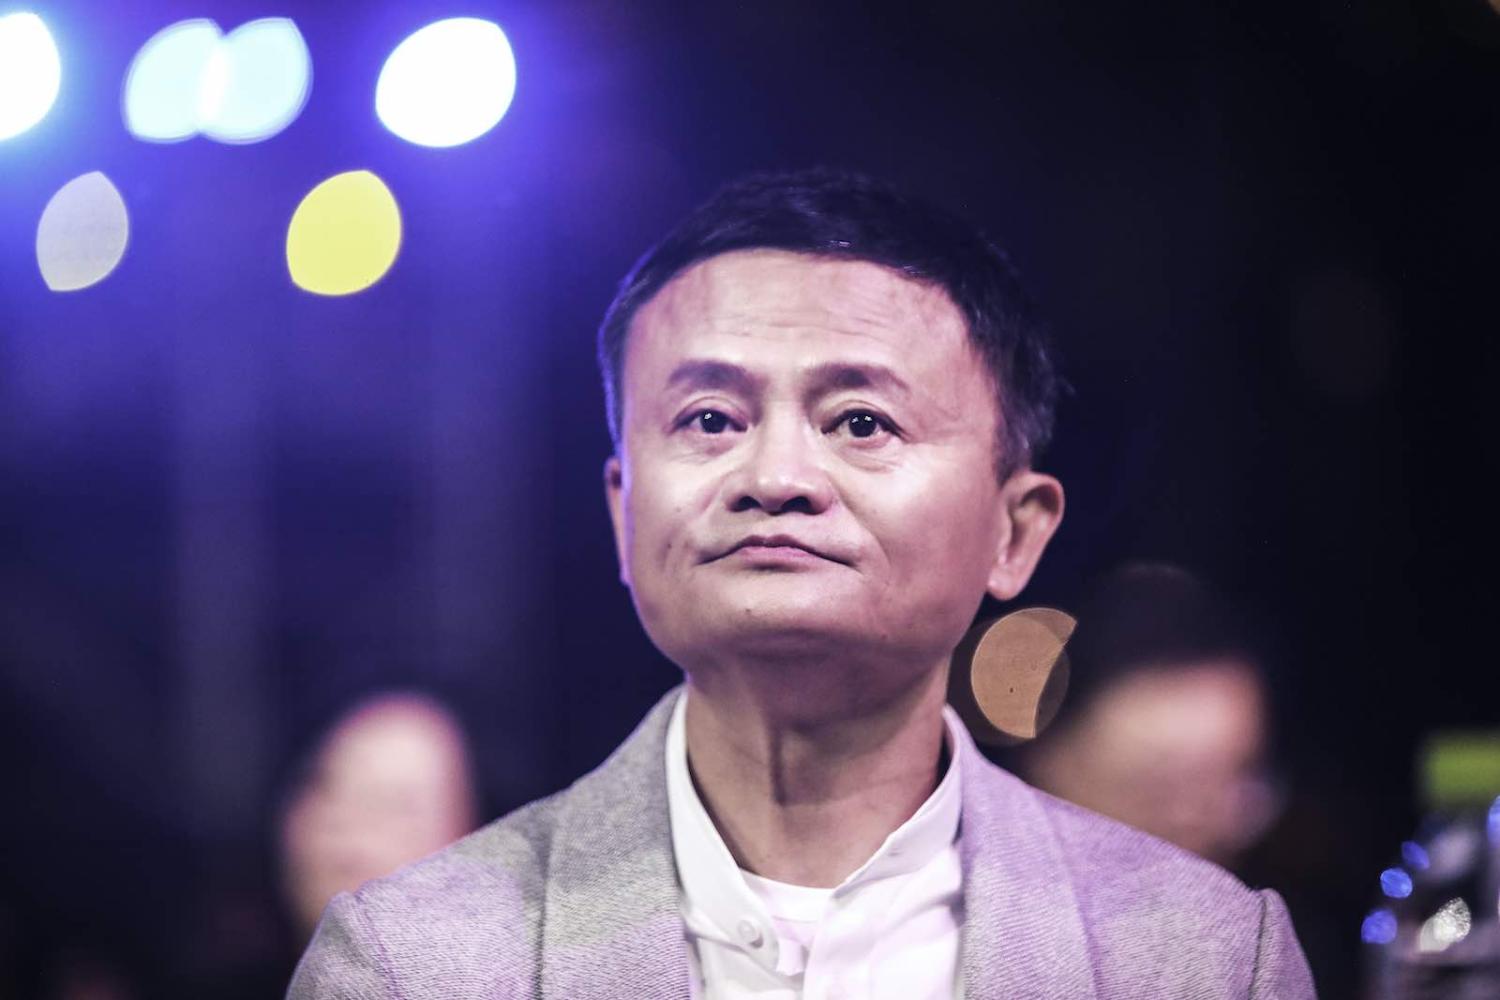 Founder of Alibaba Group Jack Ma in Sanya, China, in January 2020 at the ceremony for the Jack Ma Rural Teachers Award (Wang HE/Getty Images)